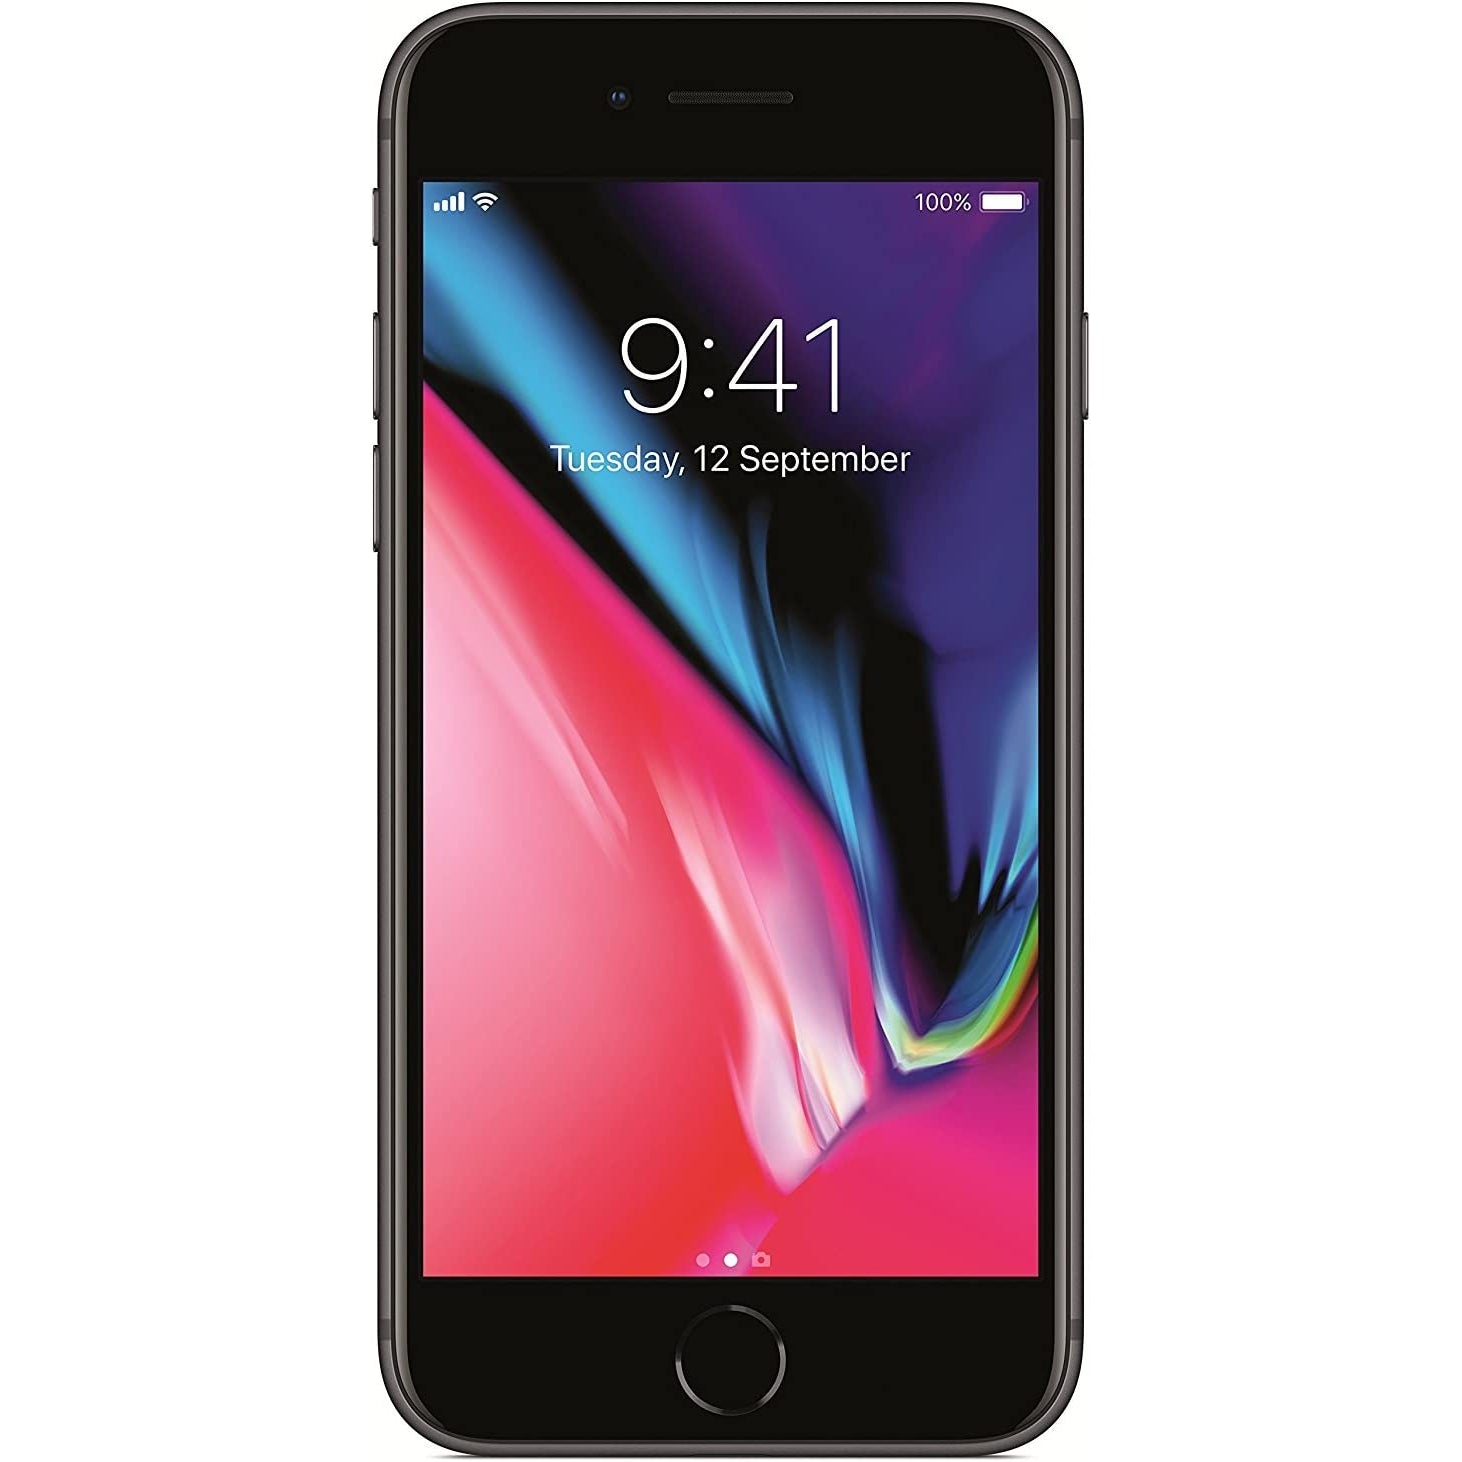 Apple iPhone 8 Plus 64GB Space Grey, Silver, Gold or Red